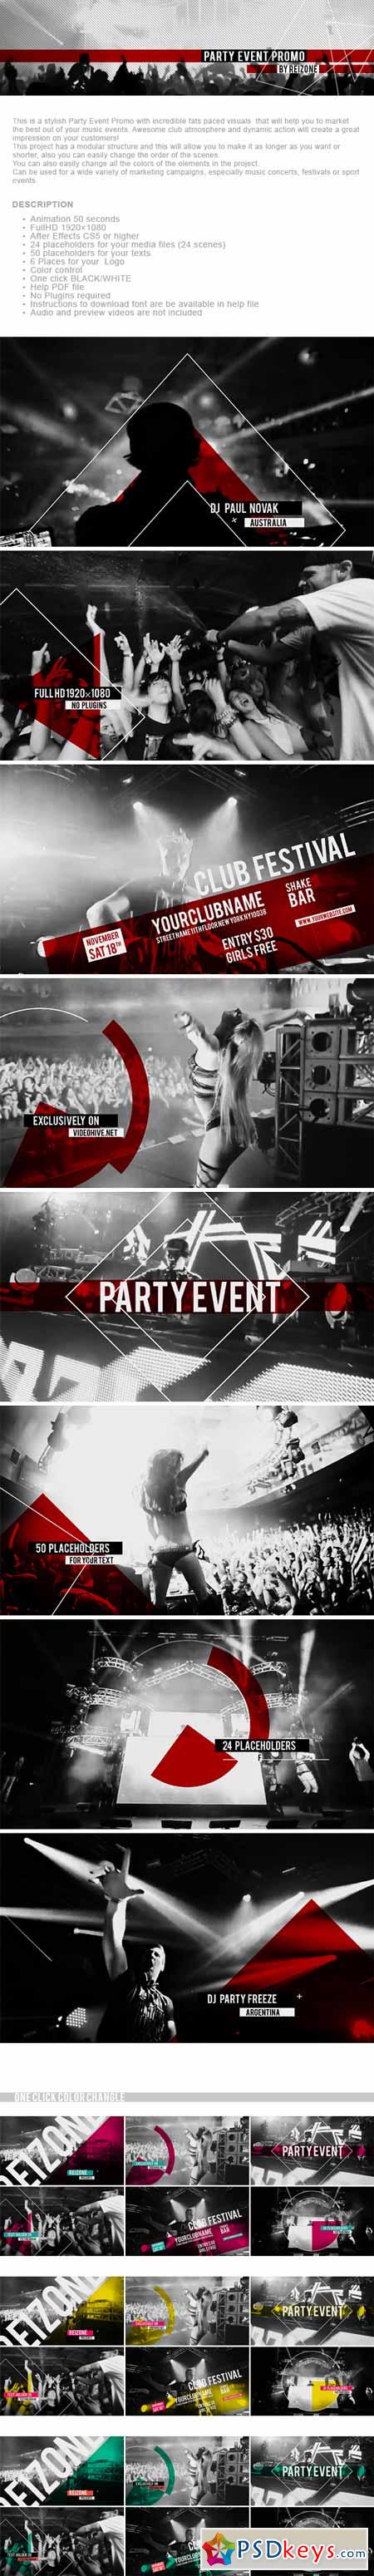 Party Event Promo - After Effects Projects